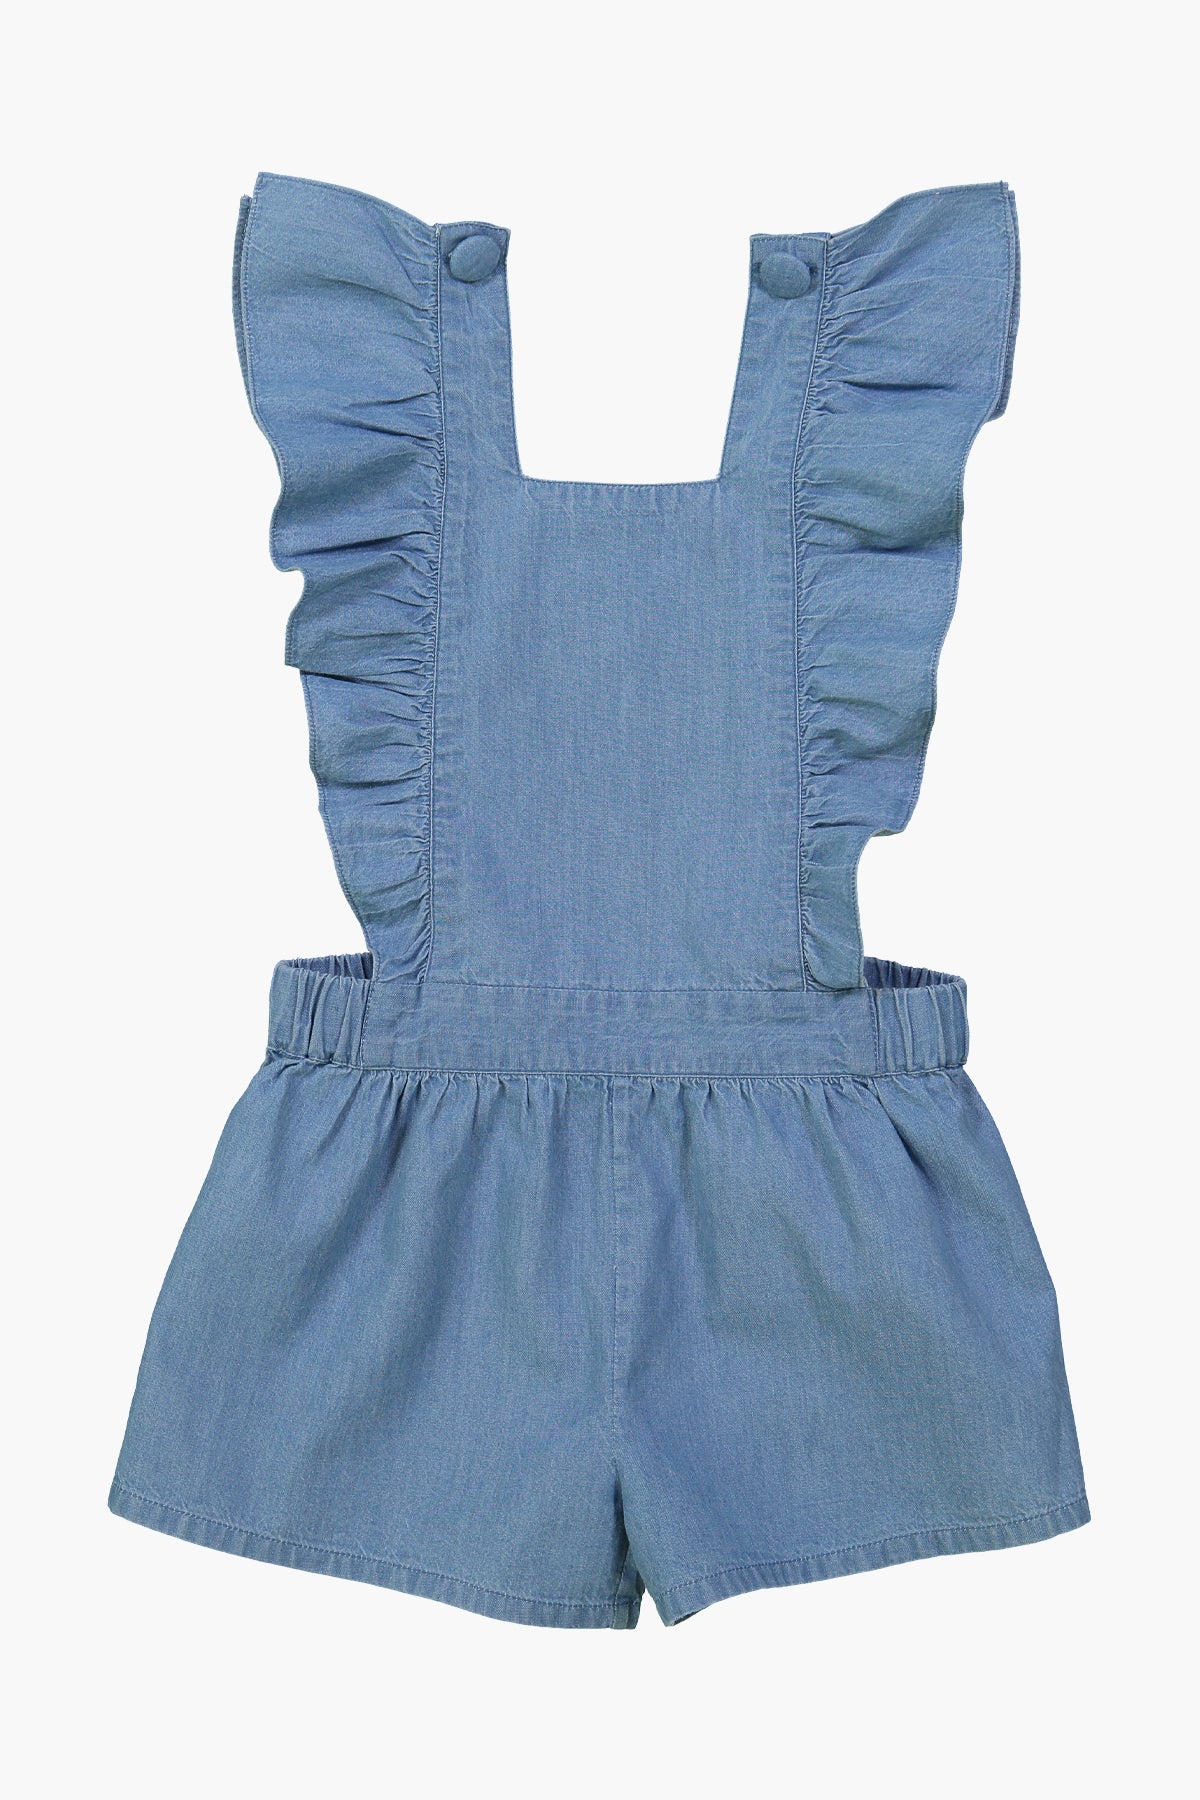 Louis Louise Cleopatre Girls Overall Romper – Mini Ruby